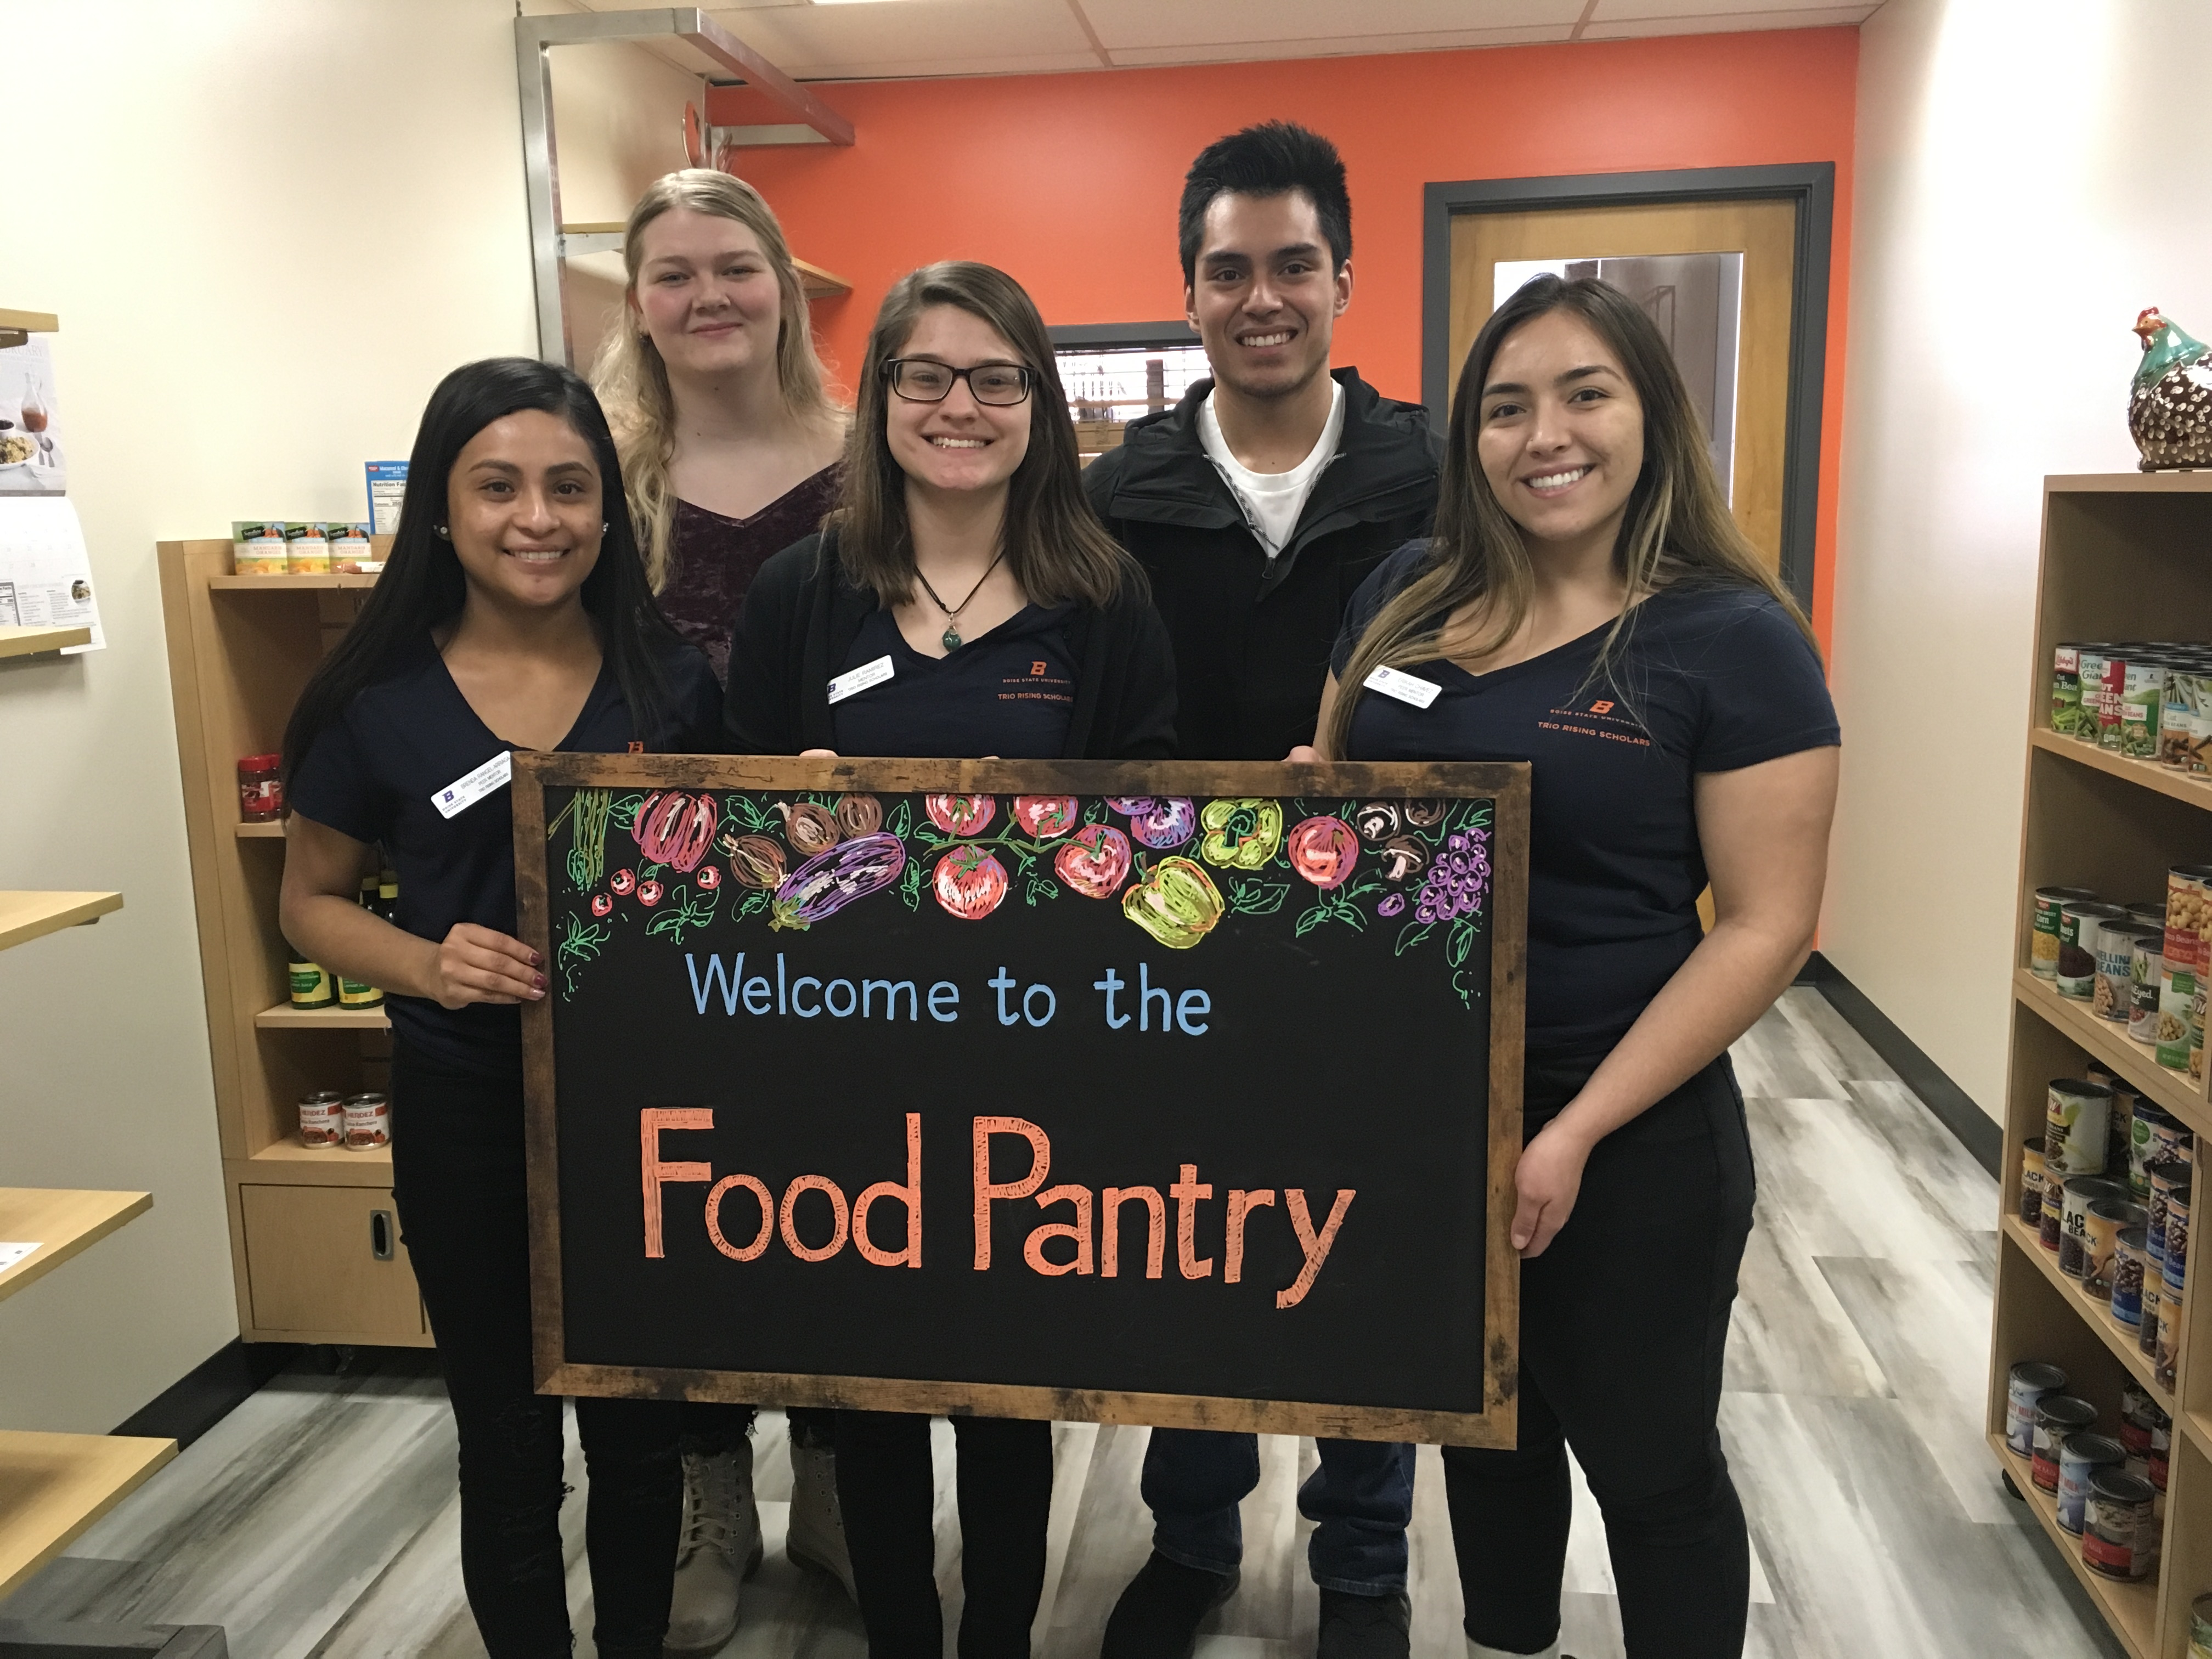 5 Students holding up a "welcome to the food pantry" sign